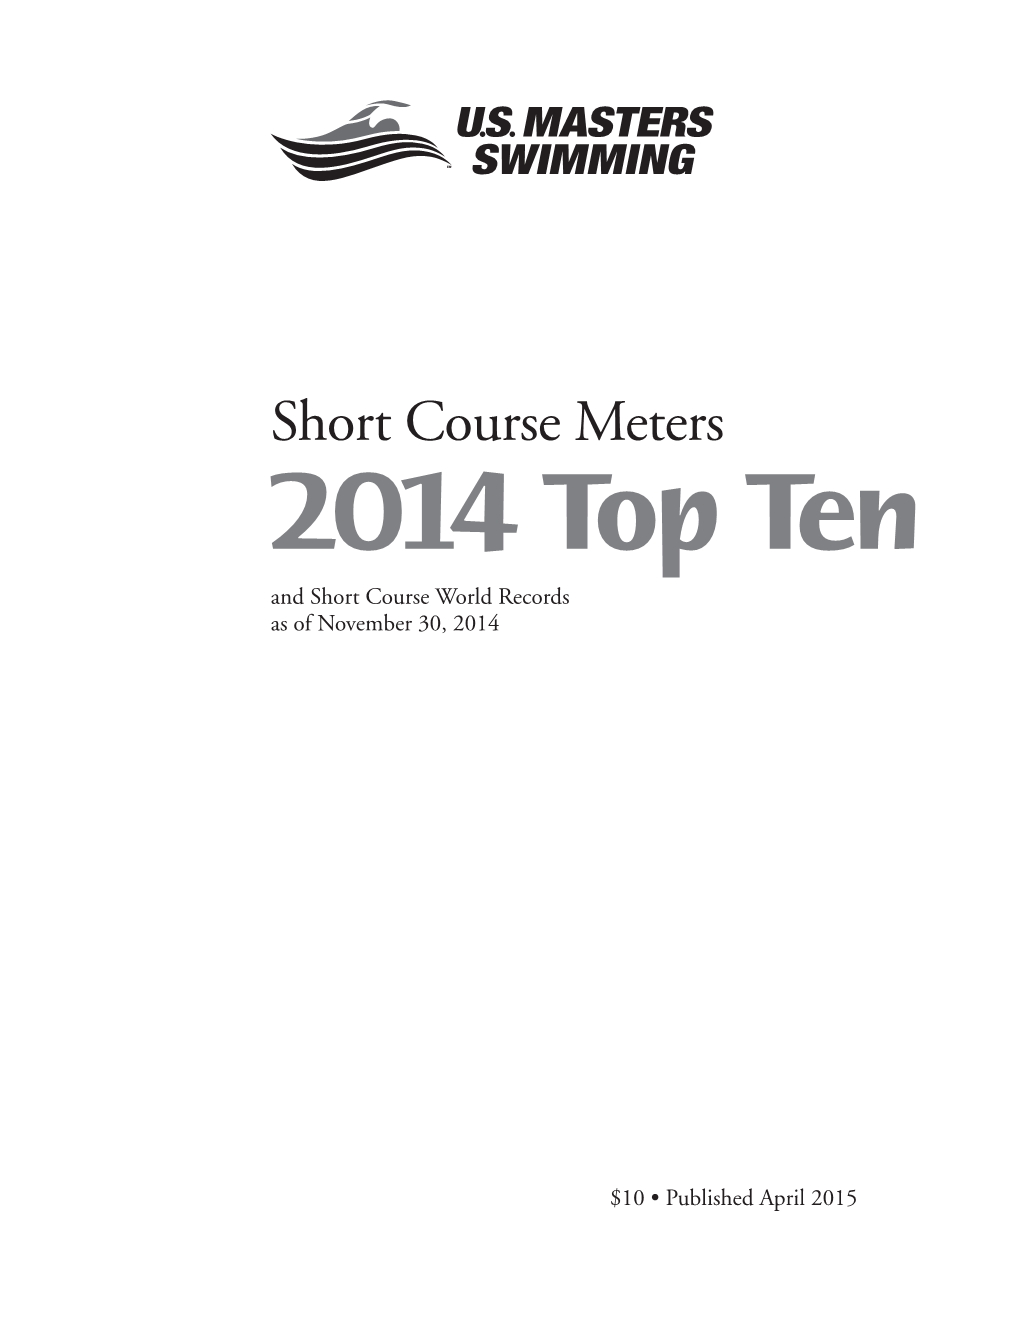 Short Course Meters 2014 Top Ten and Short Course World Records As of November 30, 2014